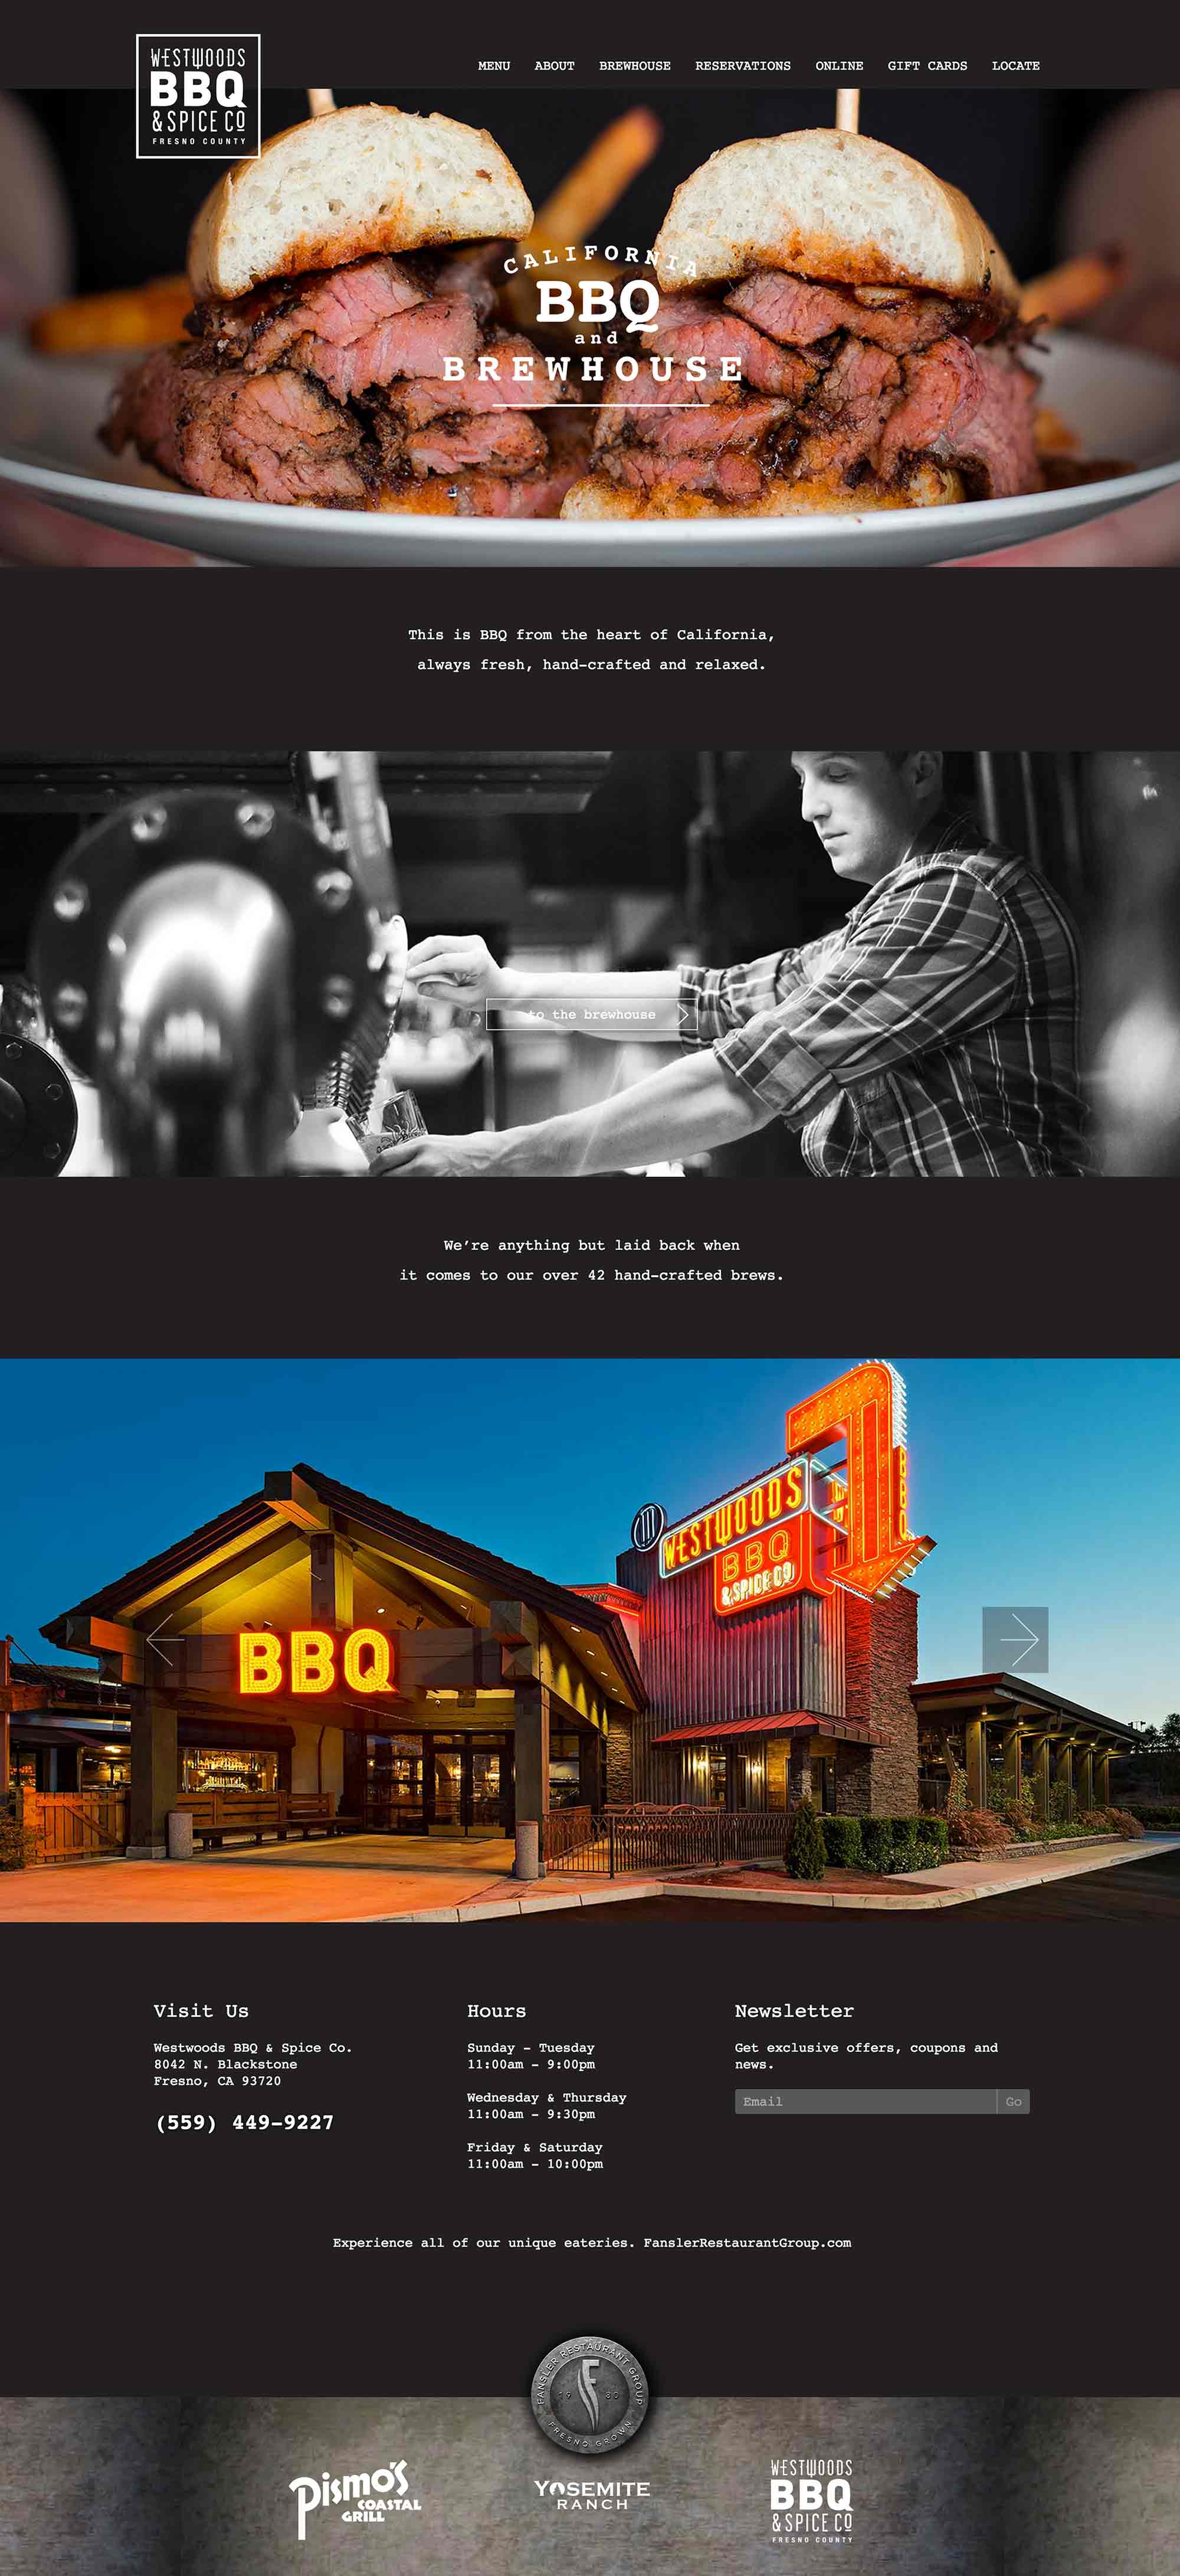 Screen shot of the Westwoods BBQ web site by Lee Powers.